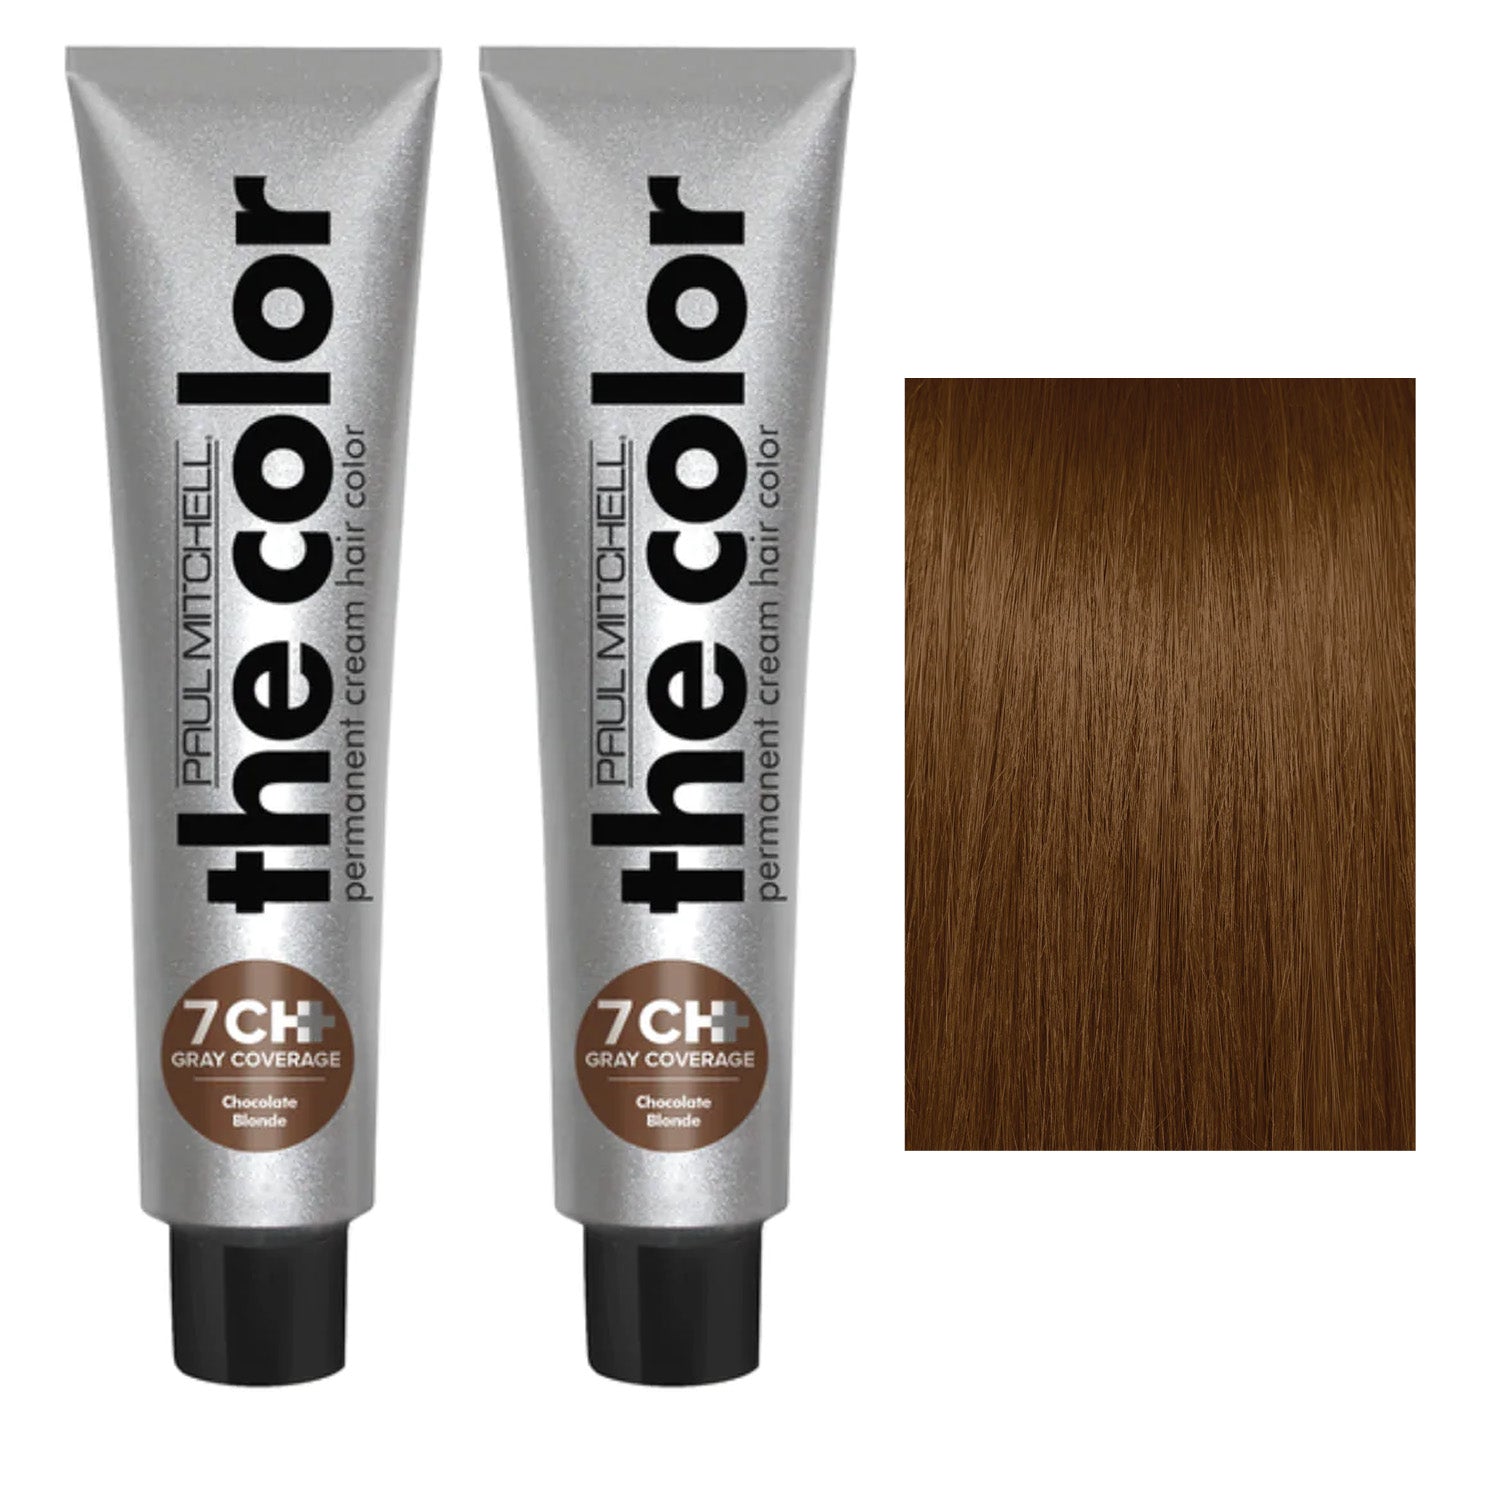 Paul Mitchell the Color Gray Coverage 7CH+ 3oz